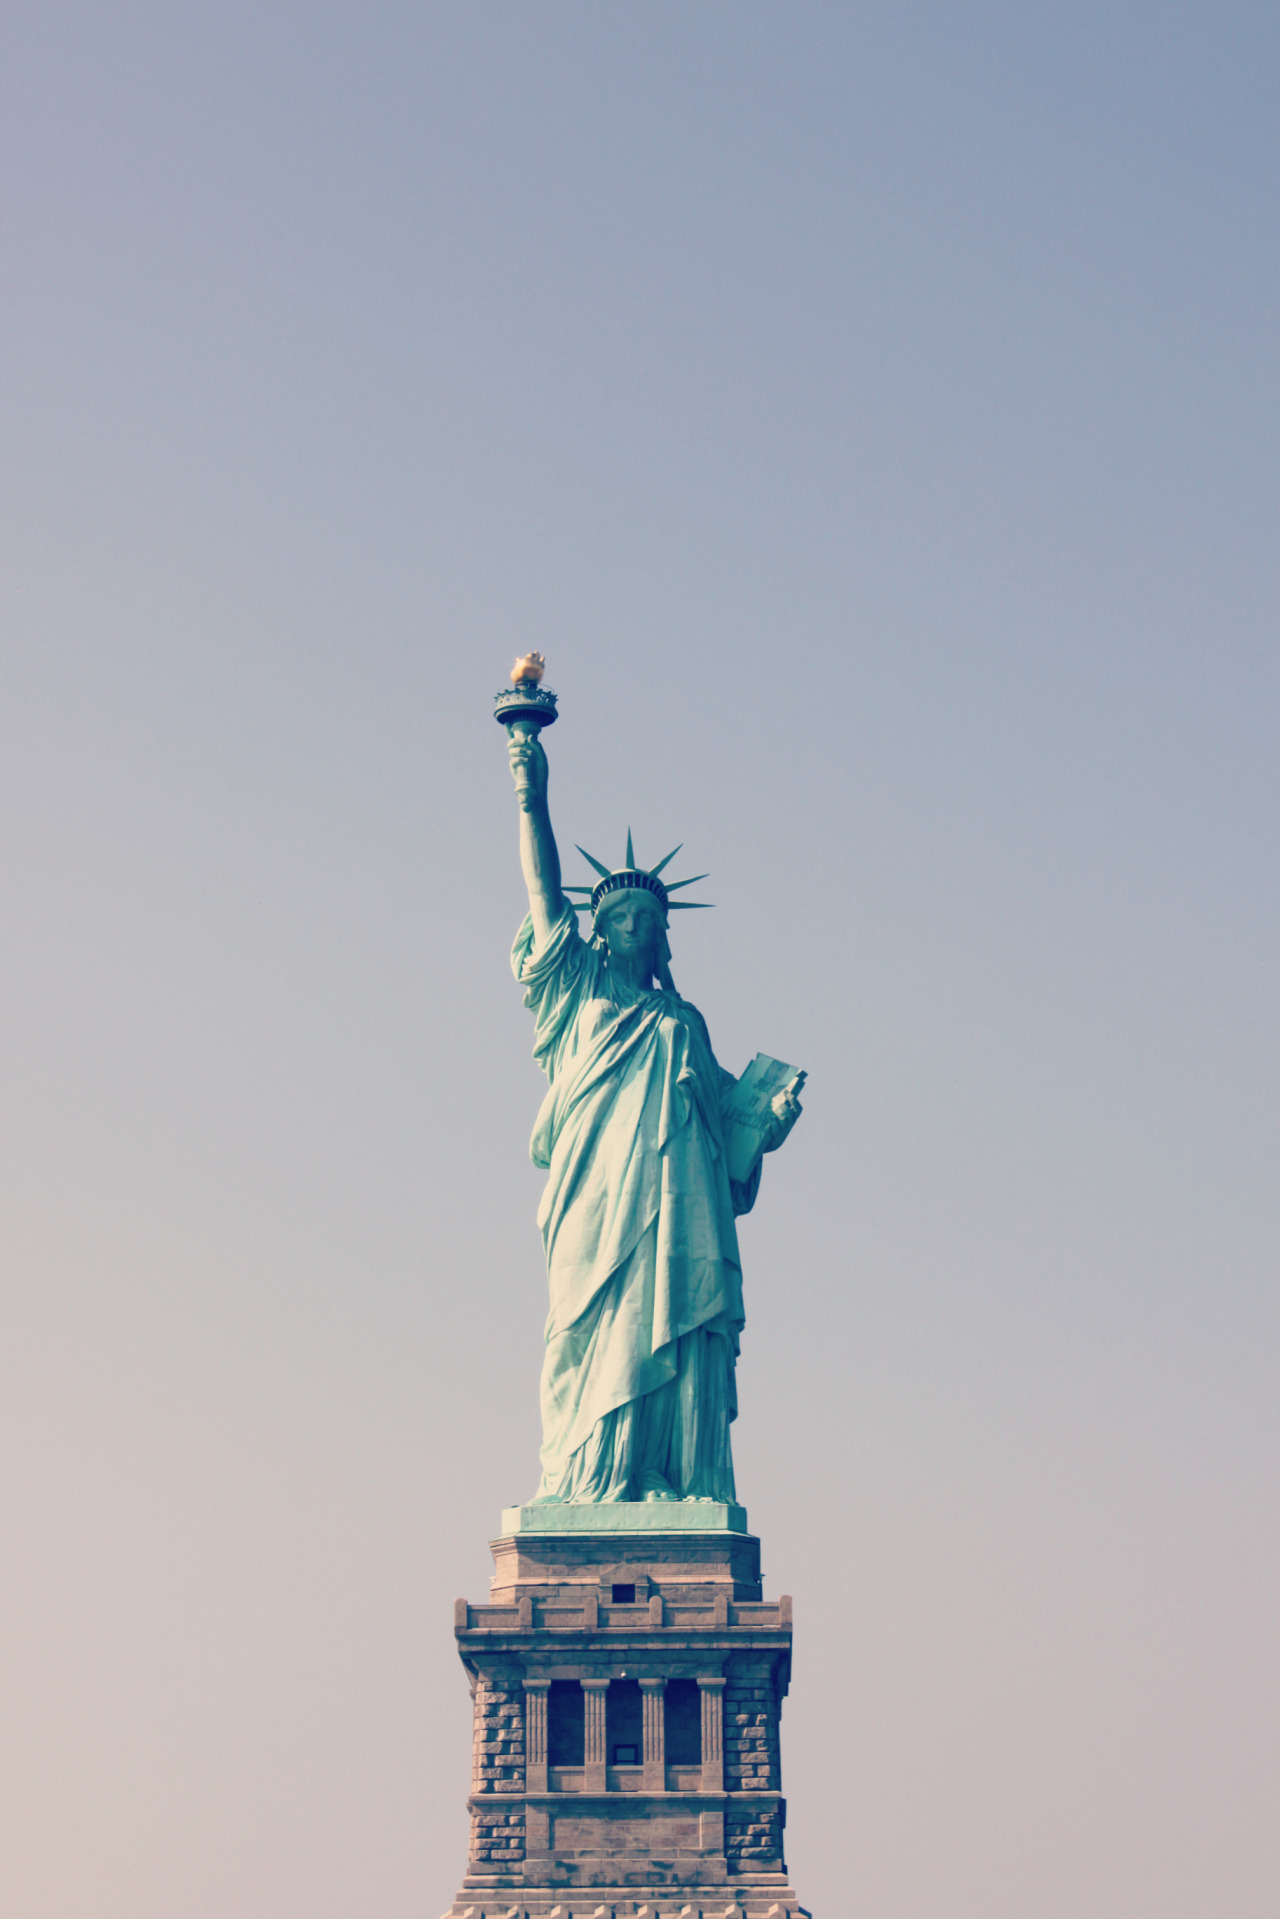 Amazing Places - Statue of Liberty - New York - USA (by CameliaTWU)